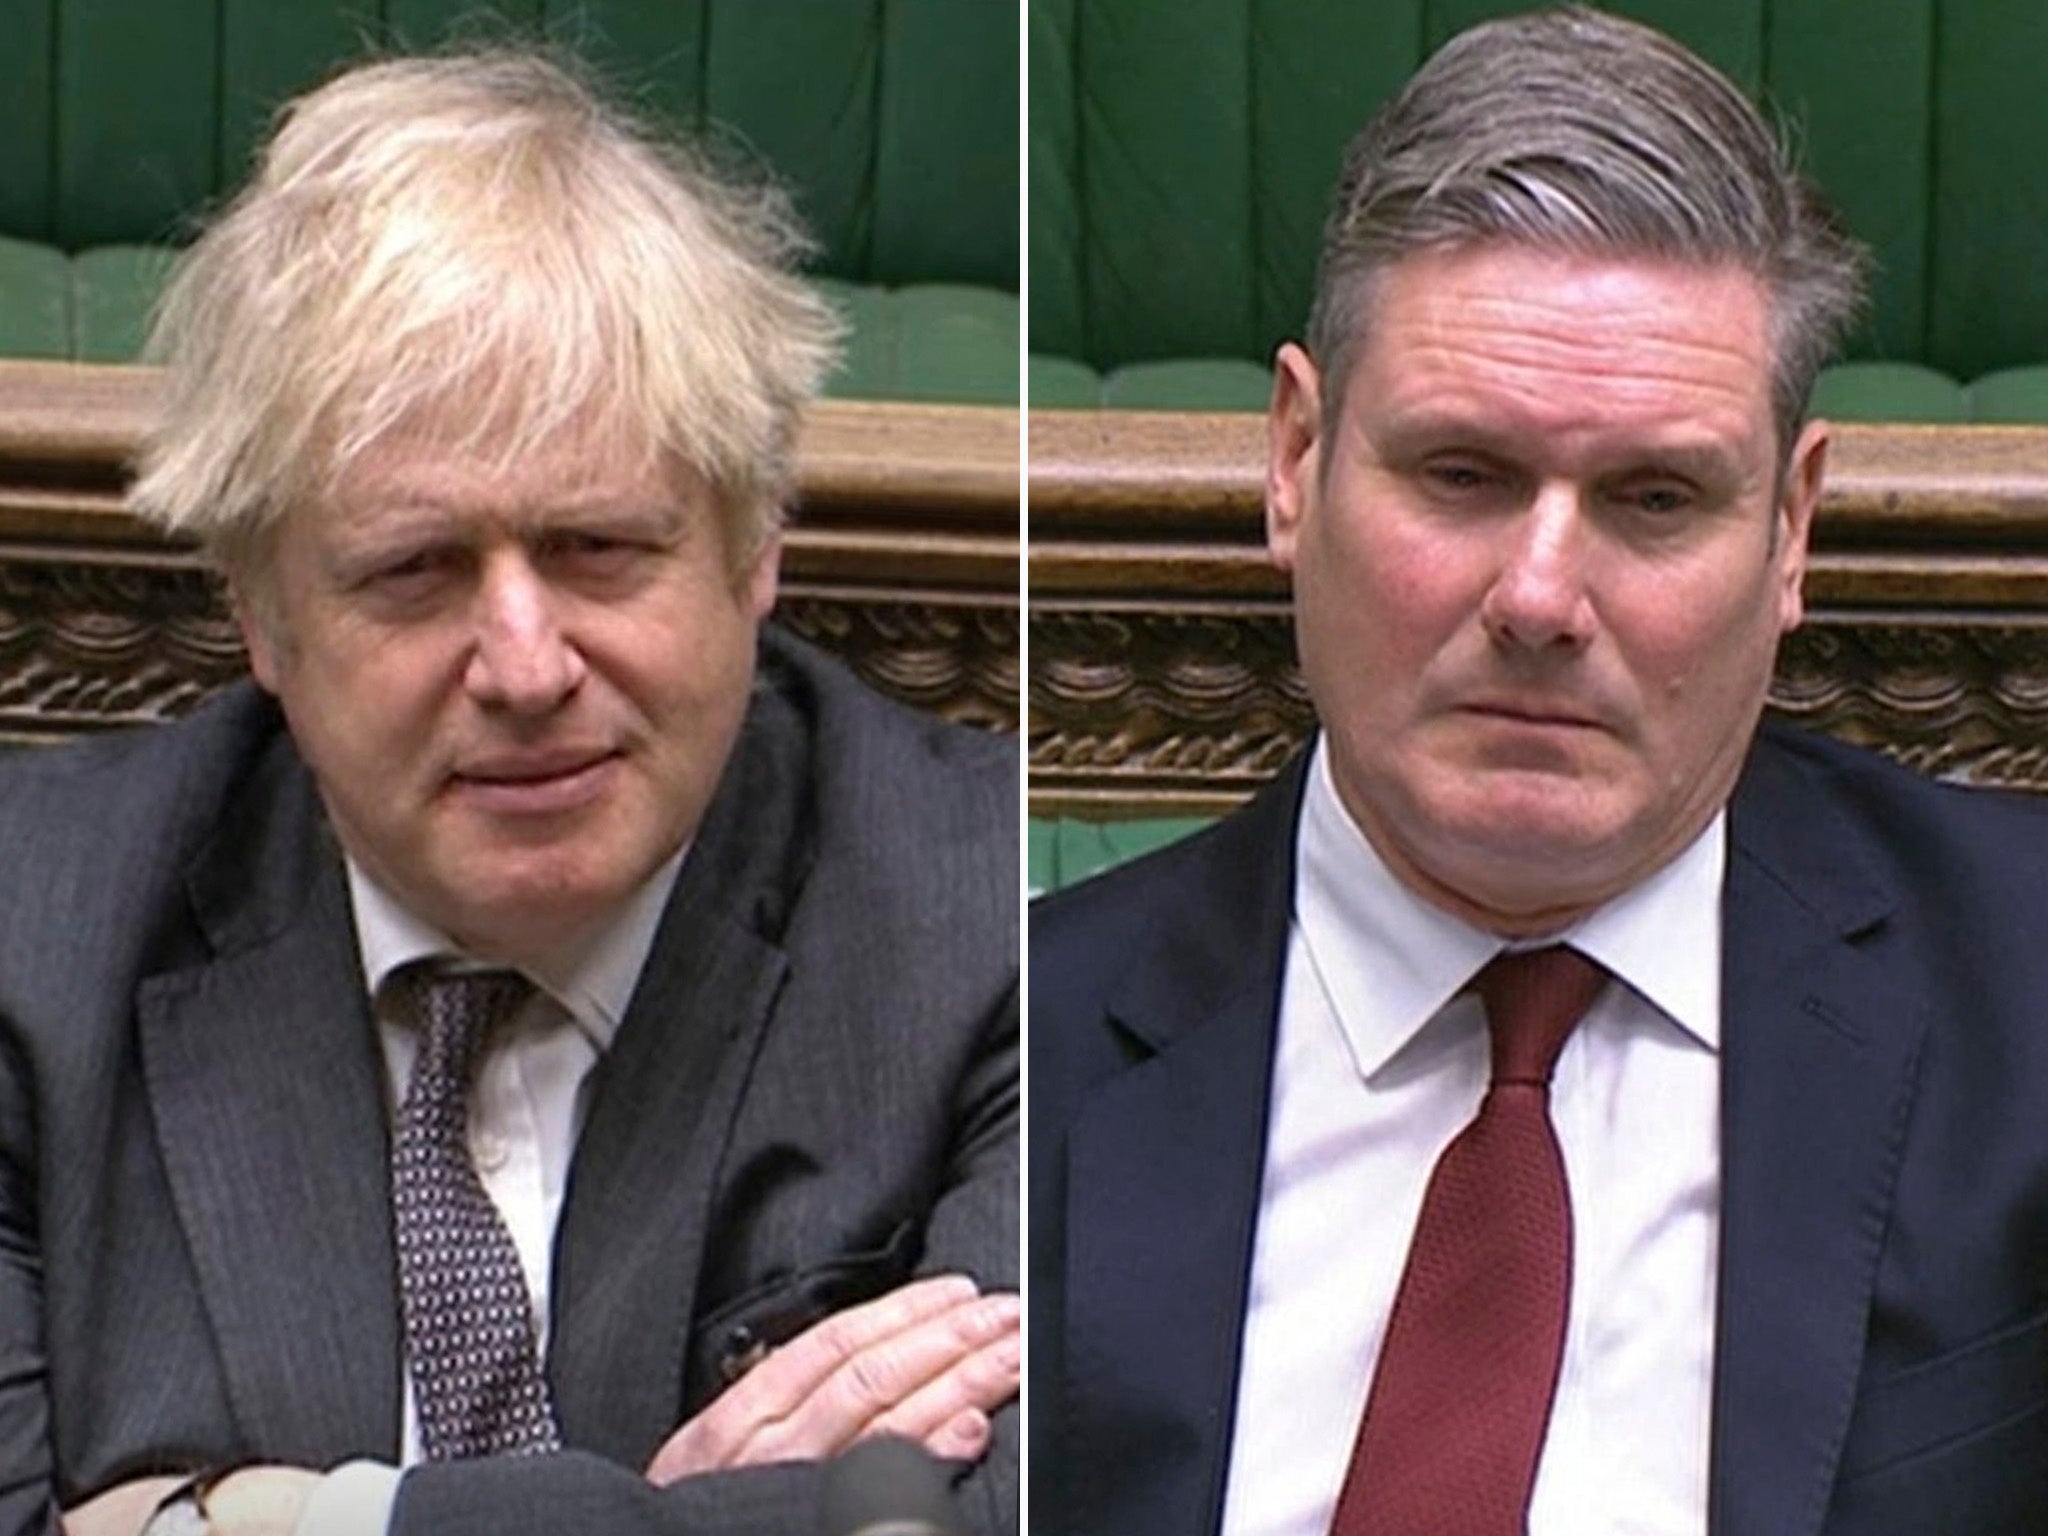 Boris Johnson has faced criticism over his Brexit deal, while Keir Starmer has faced calls to push for voter reform